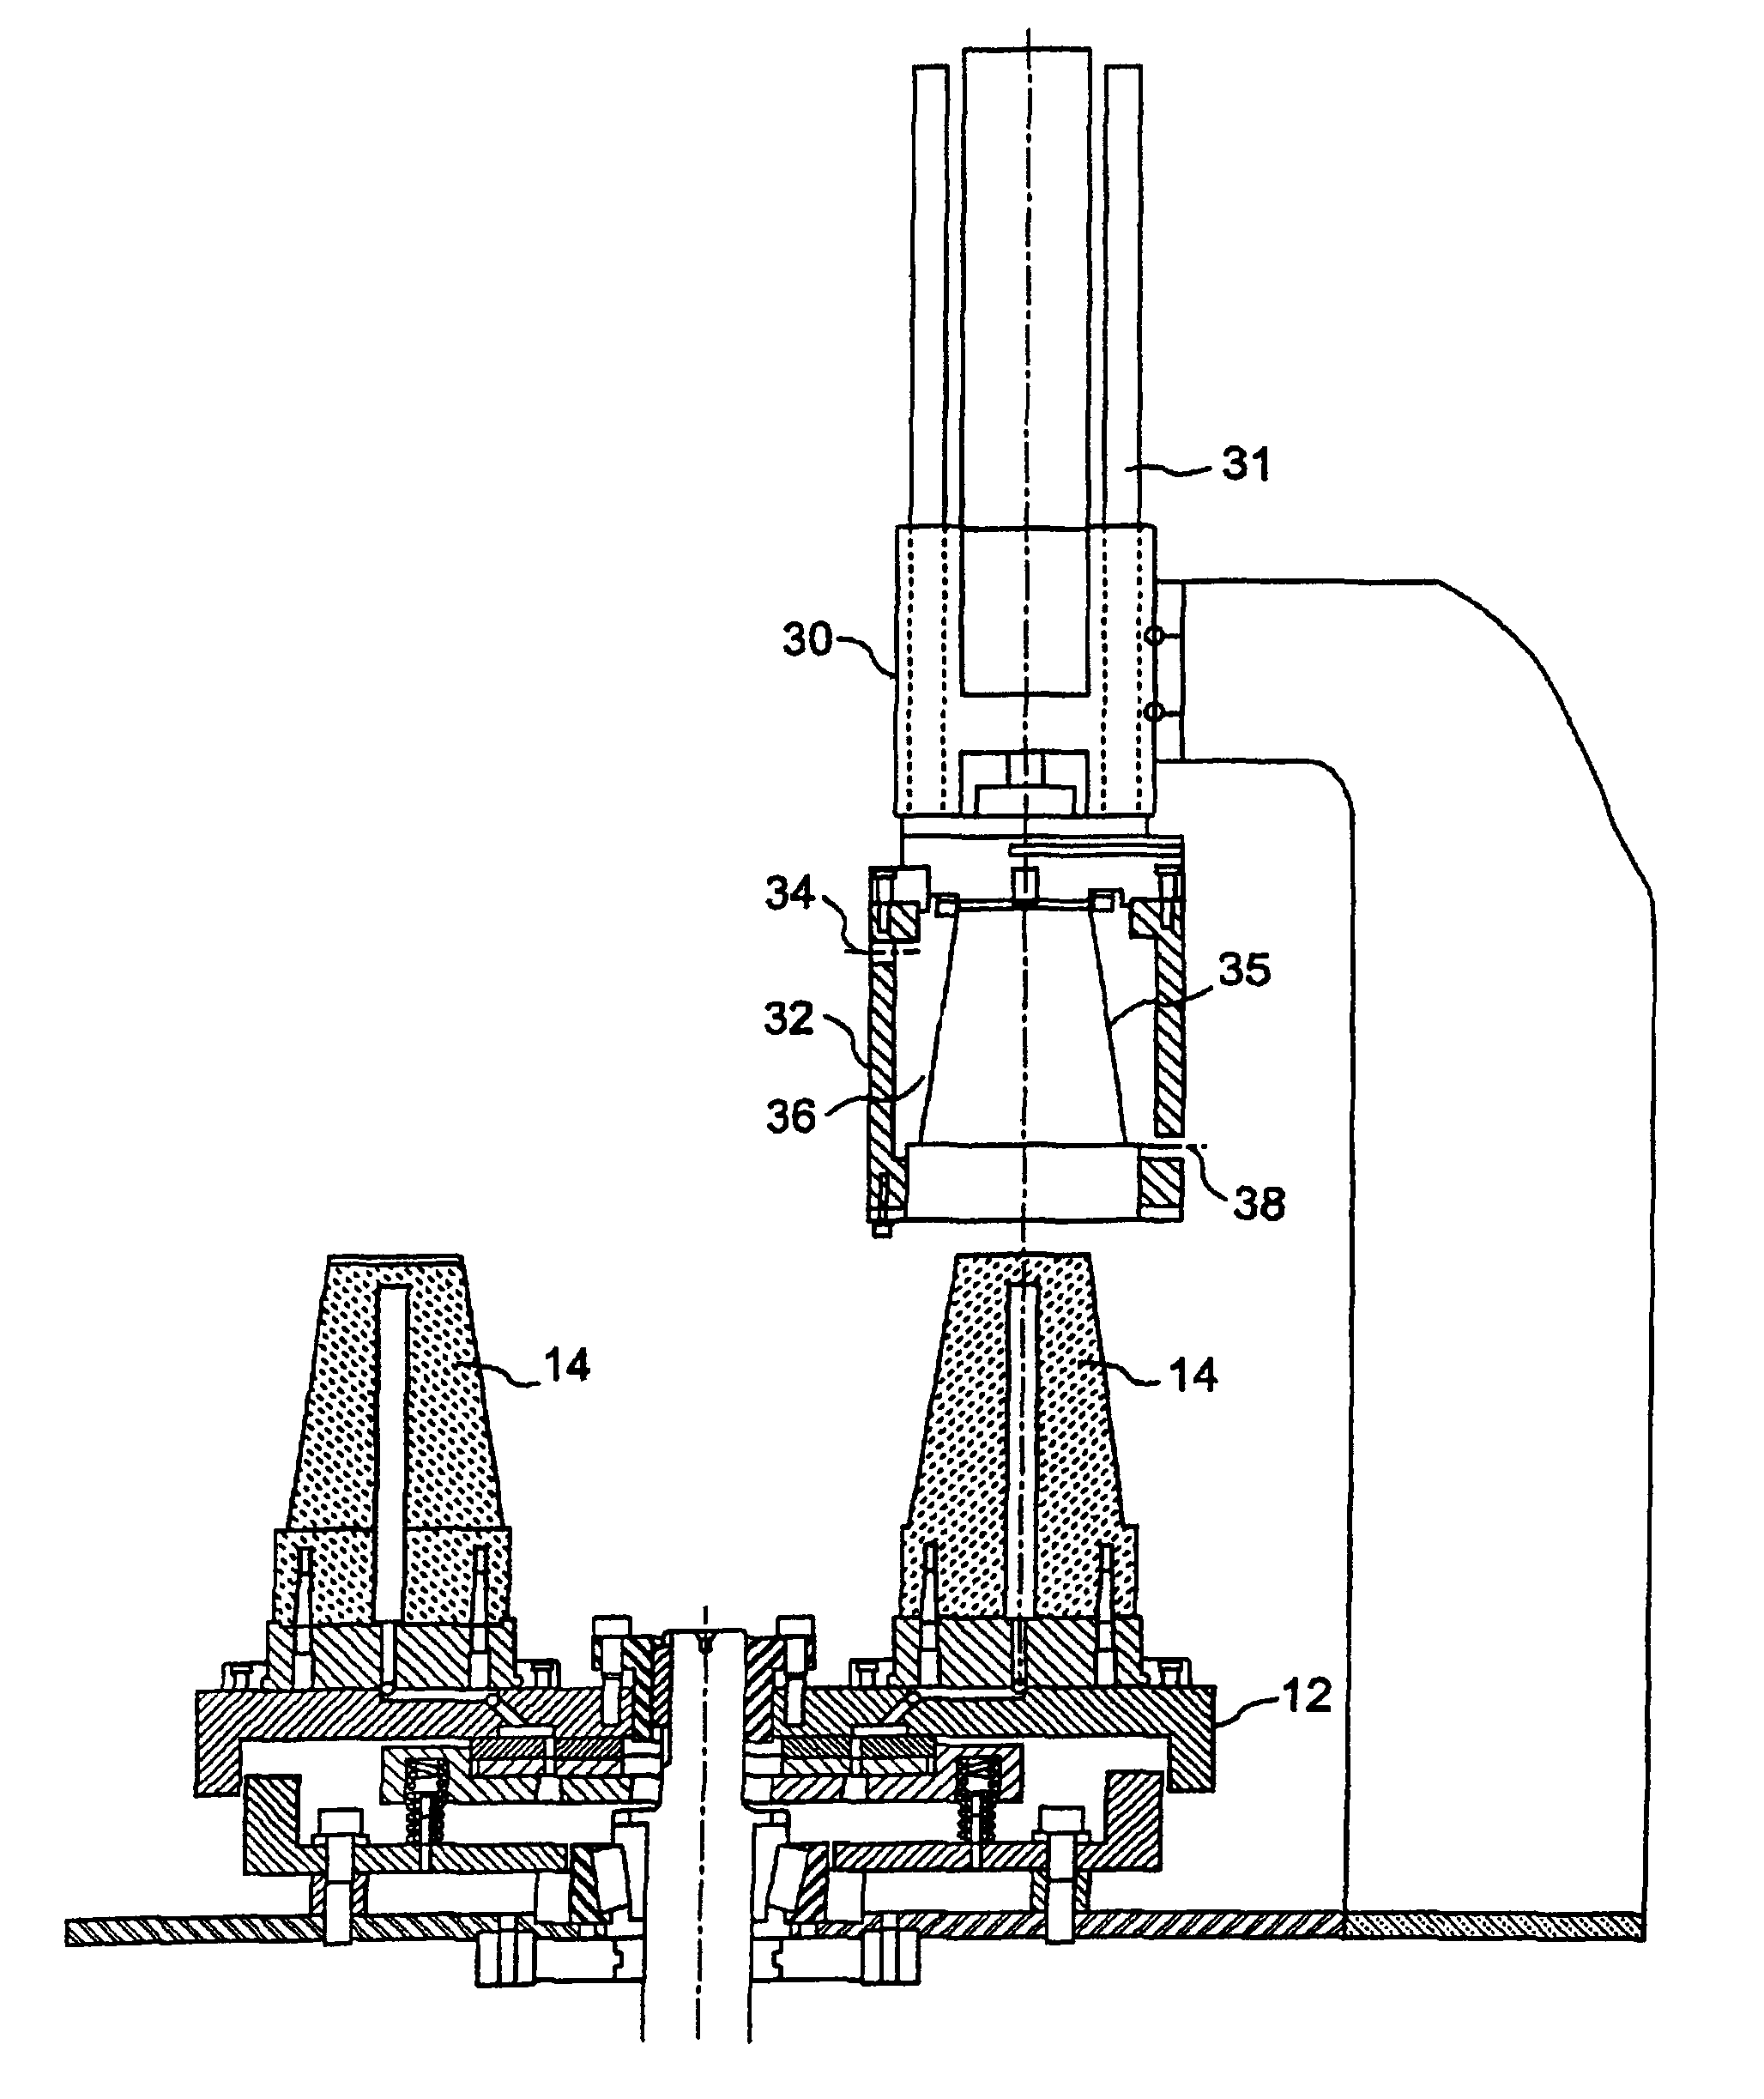 Method and apparatus for producing labeled, plastic foam containers, and product of same